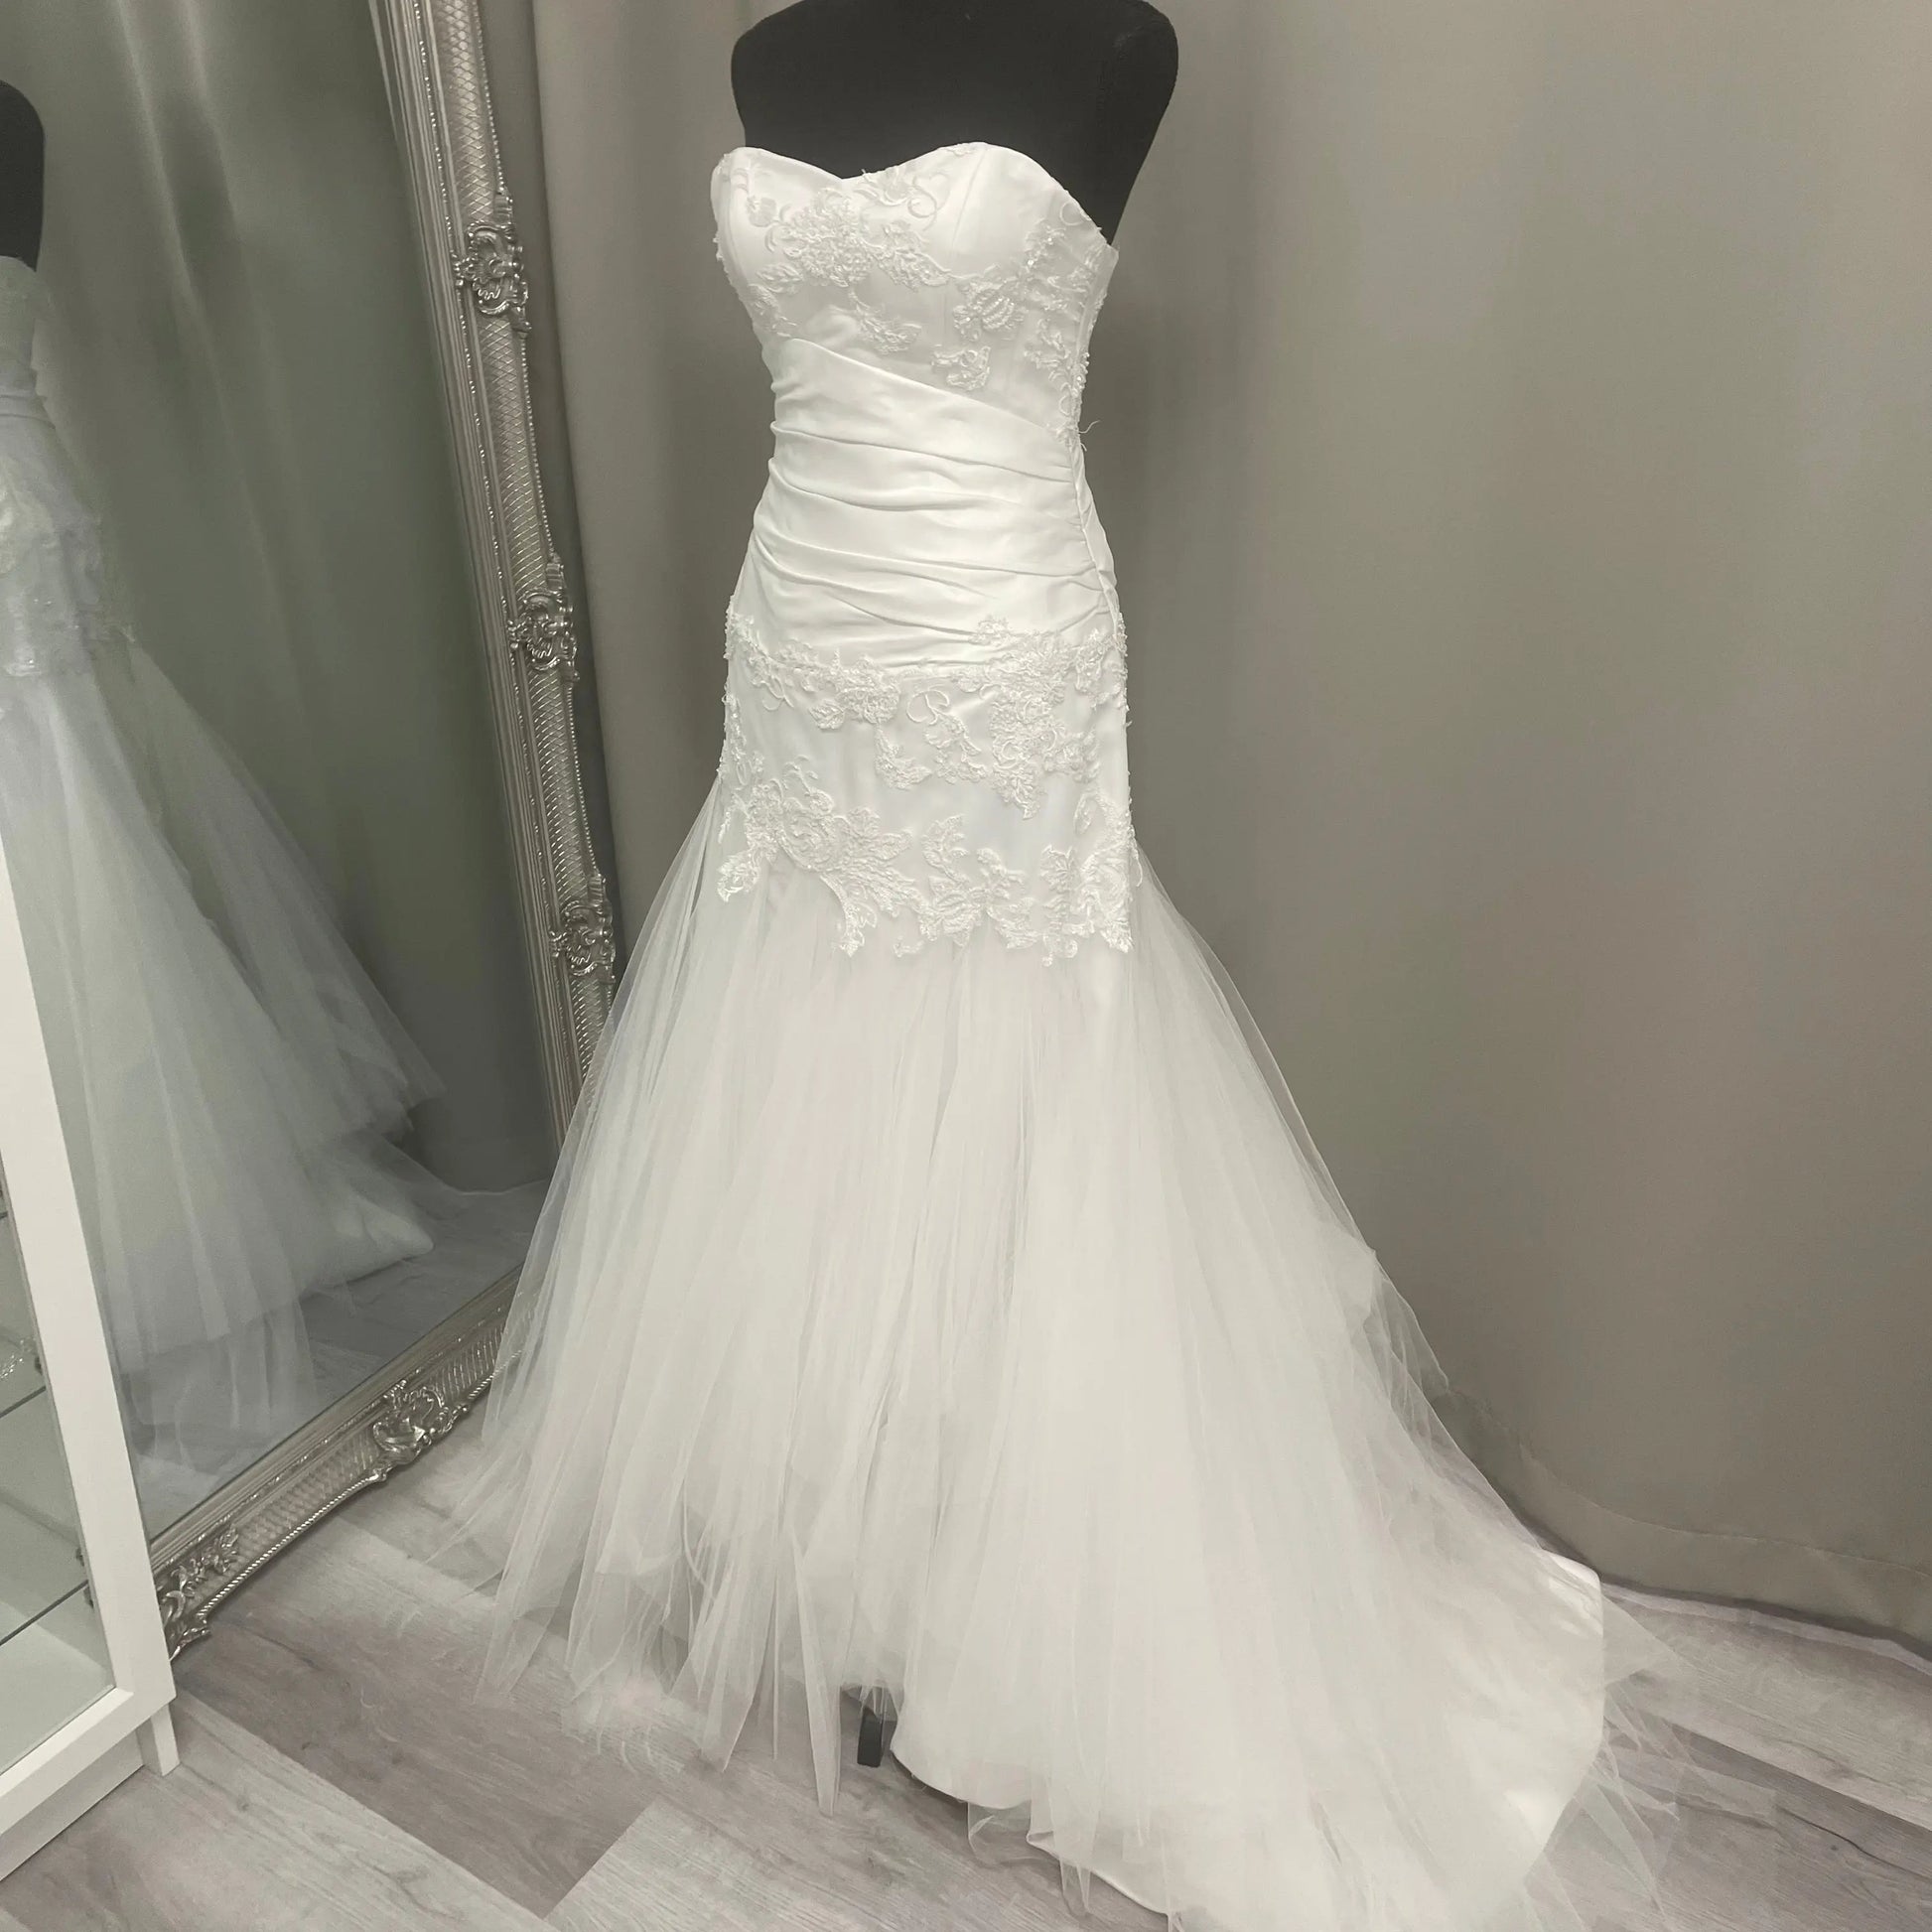 Amber Lace Wedding Dress featuring a mermaid silhouette with lace and crepe materials, sweetheart neckline, low V-back design, and a long trailing train, perfect for modern and elegant brides.